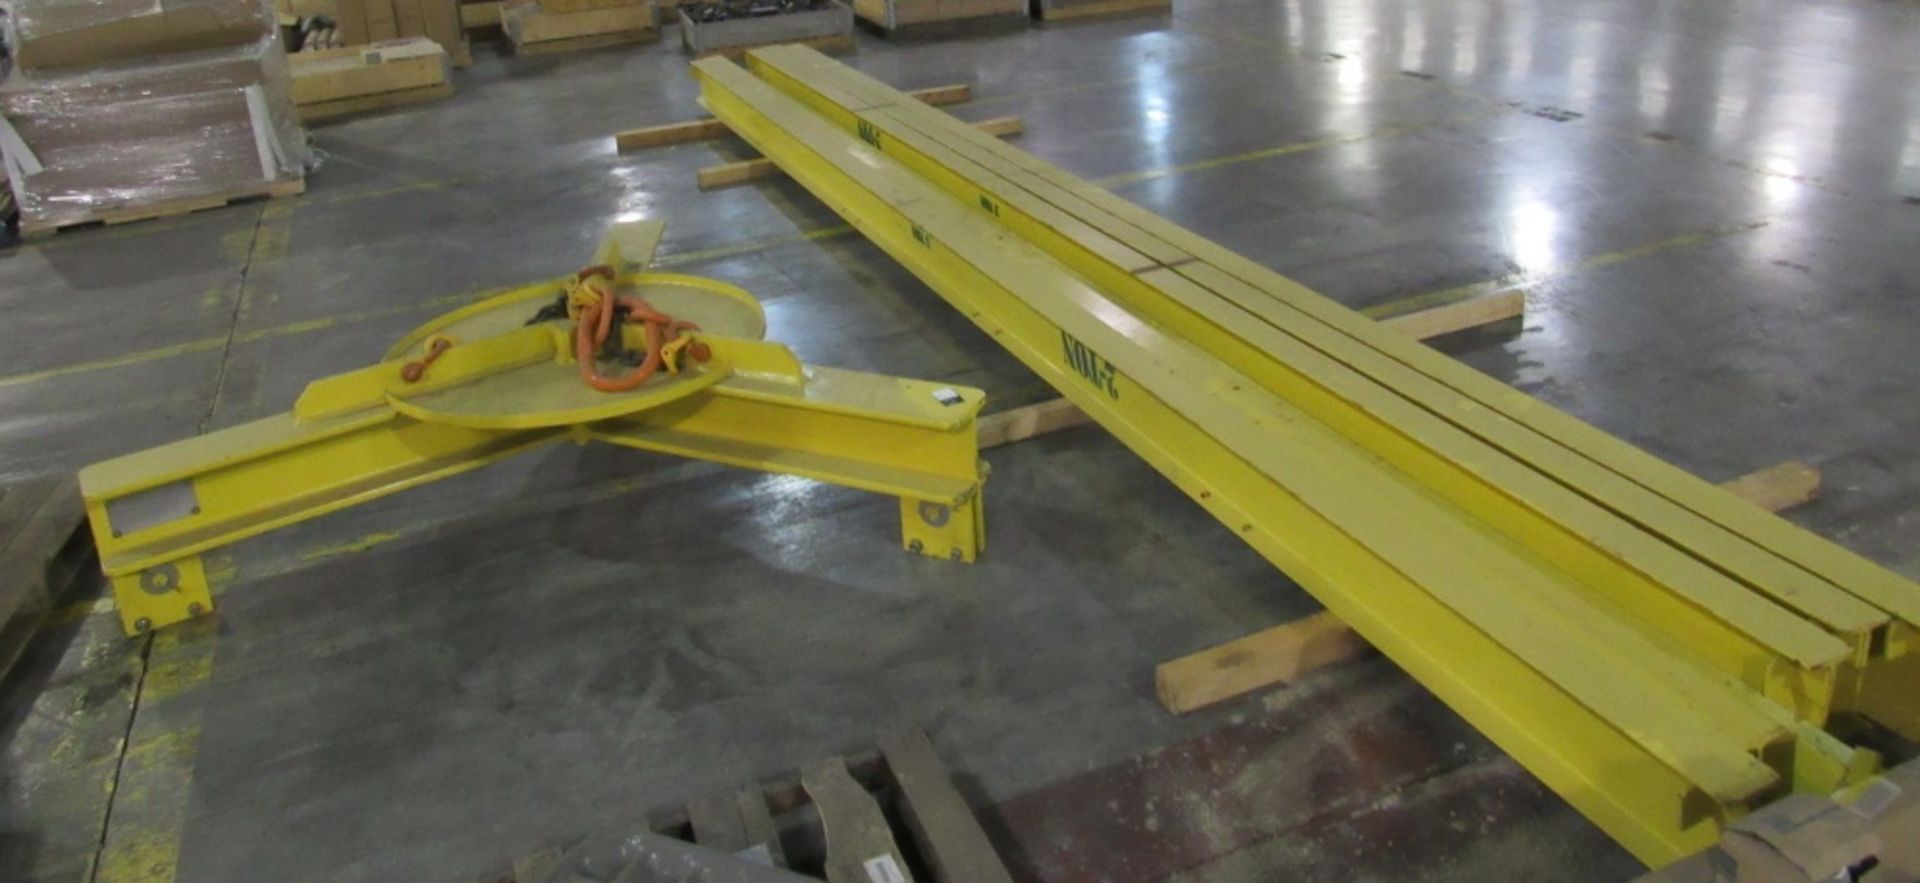 Overhead Crane Parts- ***Located in Cleveland, TN*** MFR - Tragfahigkeit (6) Beams/ Supports 25' x